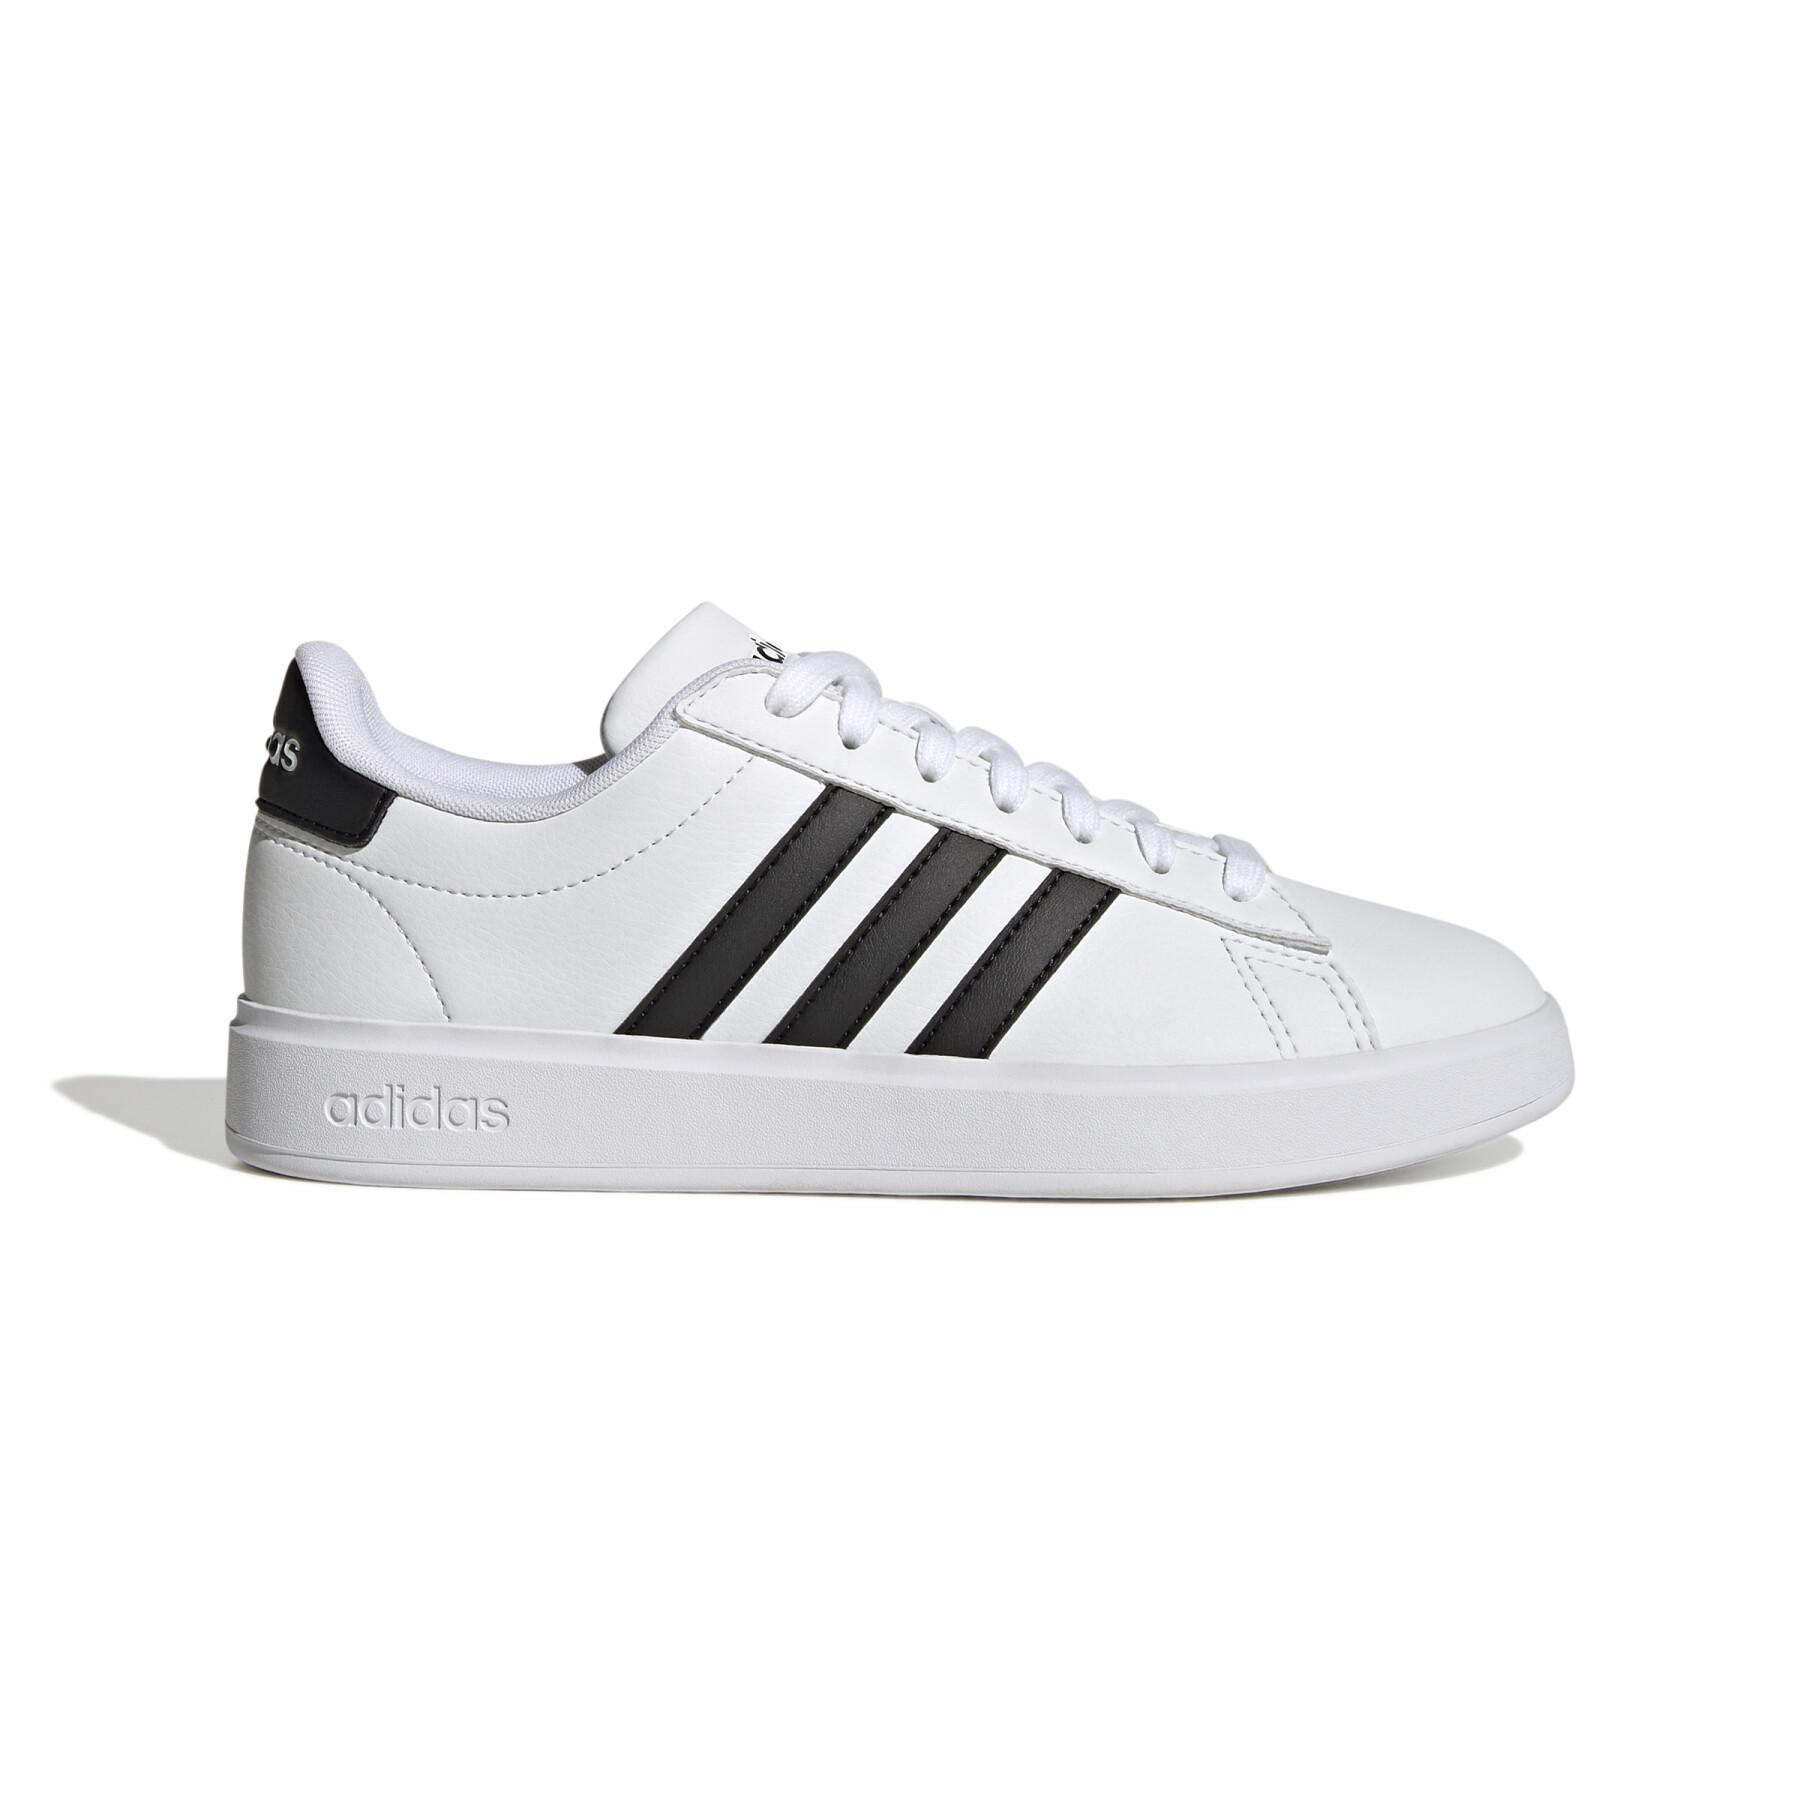 https://media.handball-store.fr/catalog/product/cache/image/1800x/9df78eab33525d08d6e5fb8d27136e95/a/d/adidas-originals_gw9214_1_footwear_photography_side_lateral_center_view_white_000.jpg